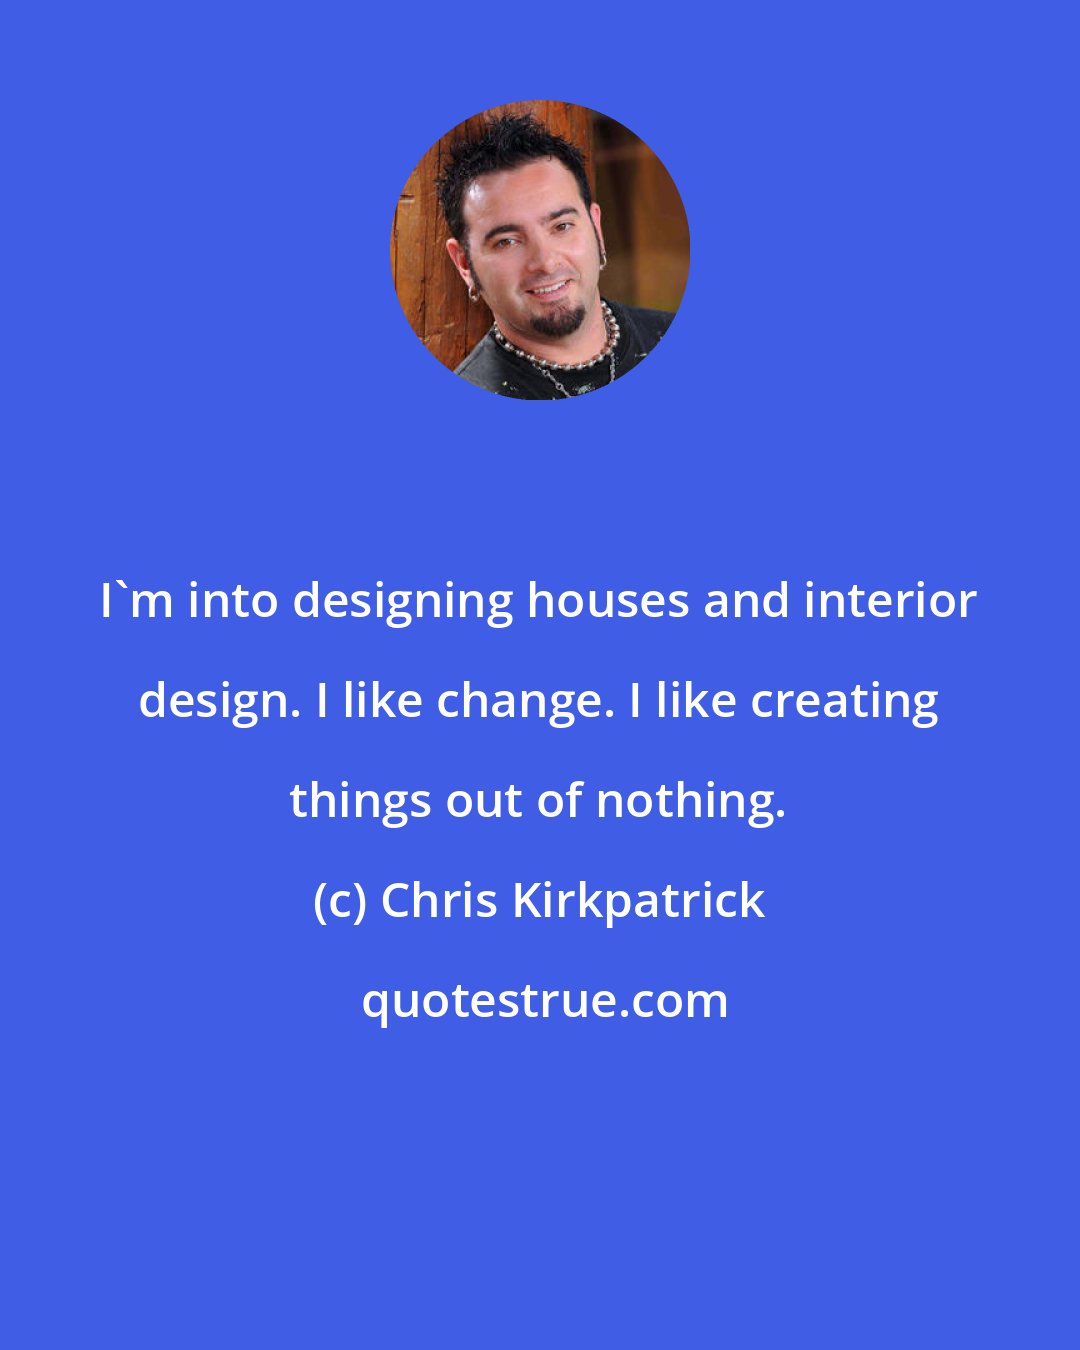 Chris Kirkpatrick: I'm into designing houses and interior design. I like change. I like creating things out of nothing.